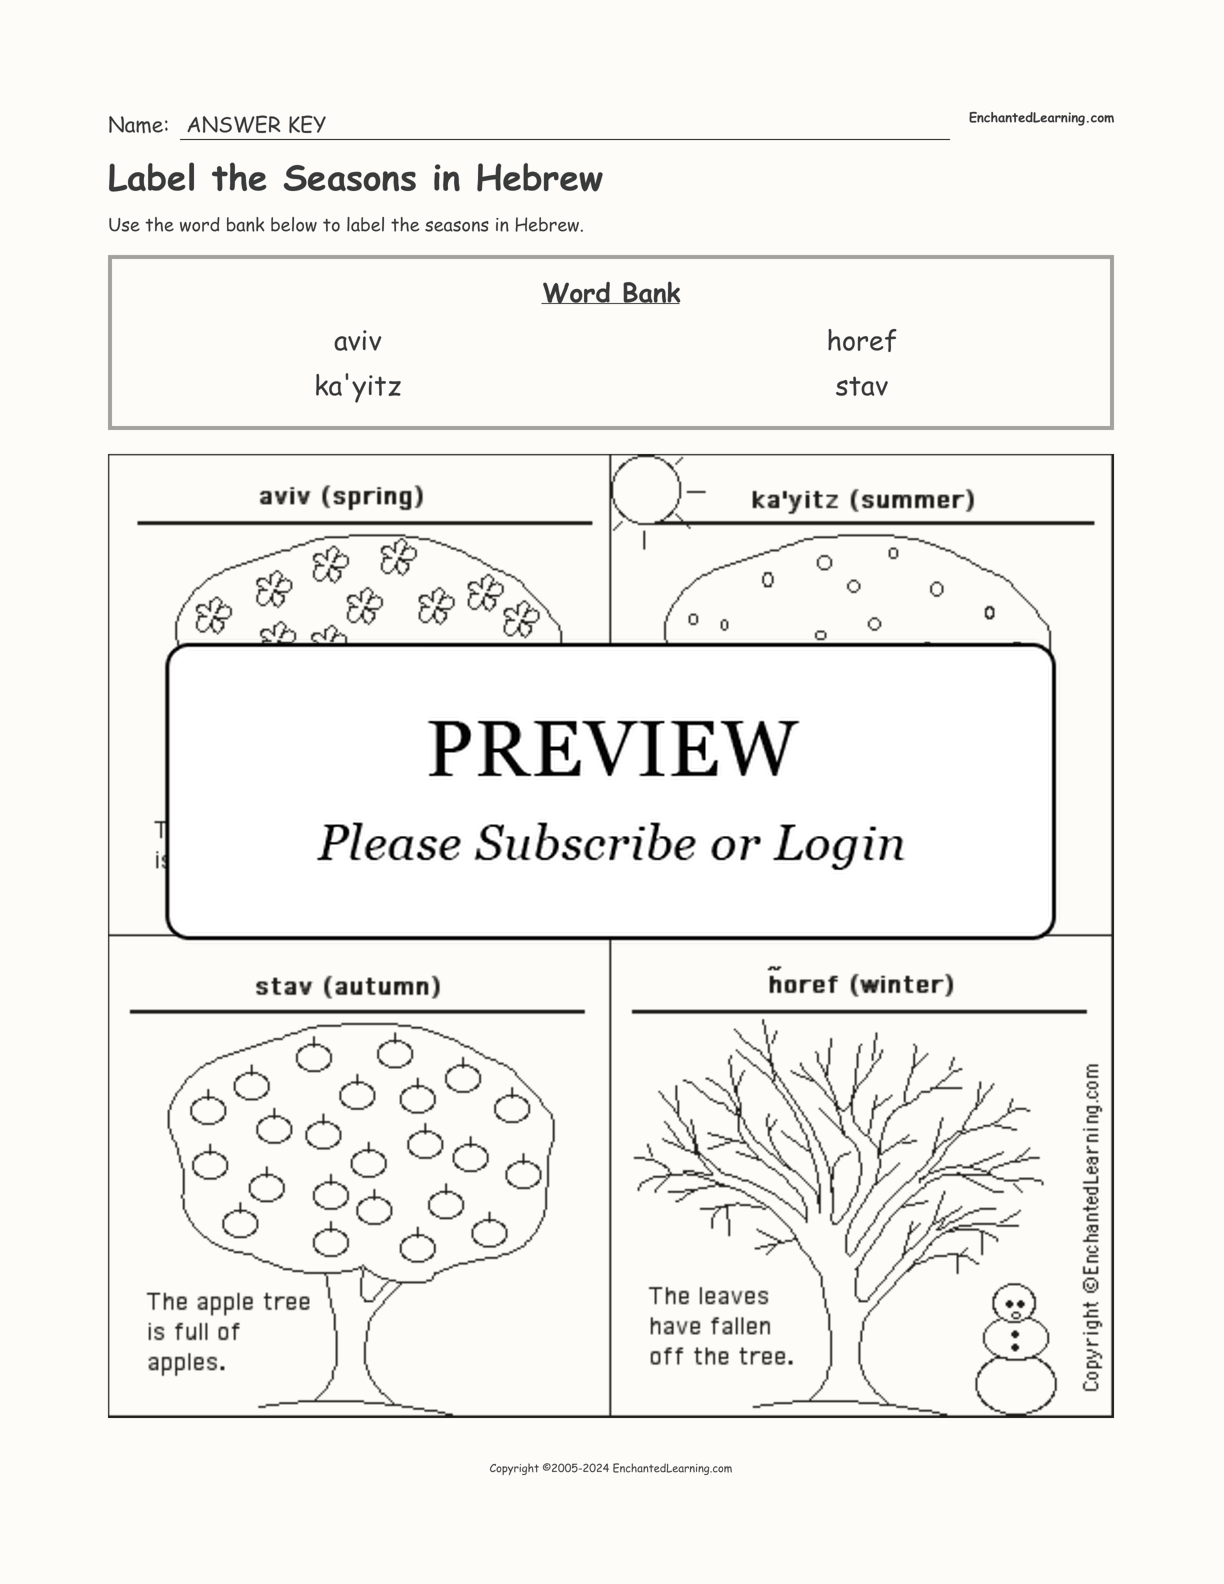 Label the Seasons in Hebrew interactive worksheet page 2